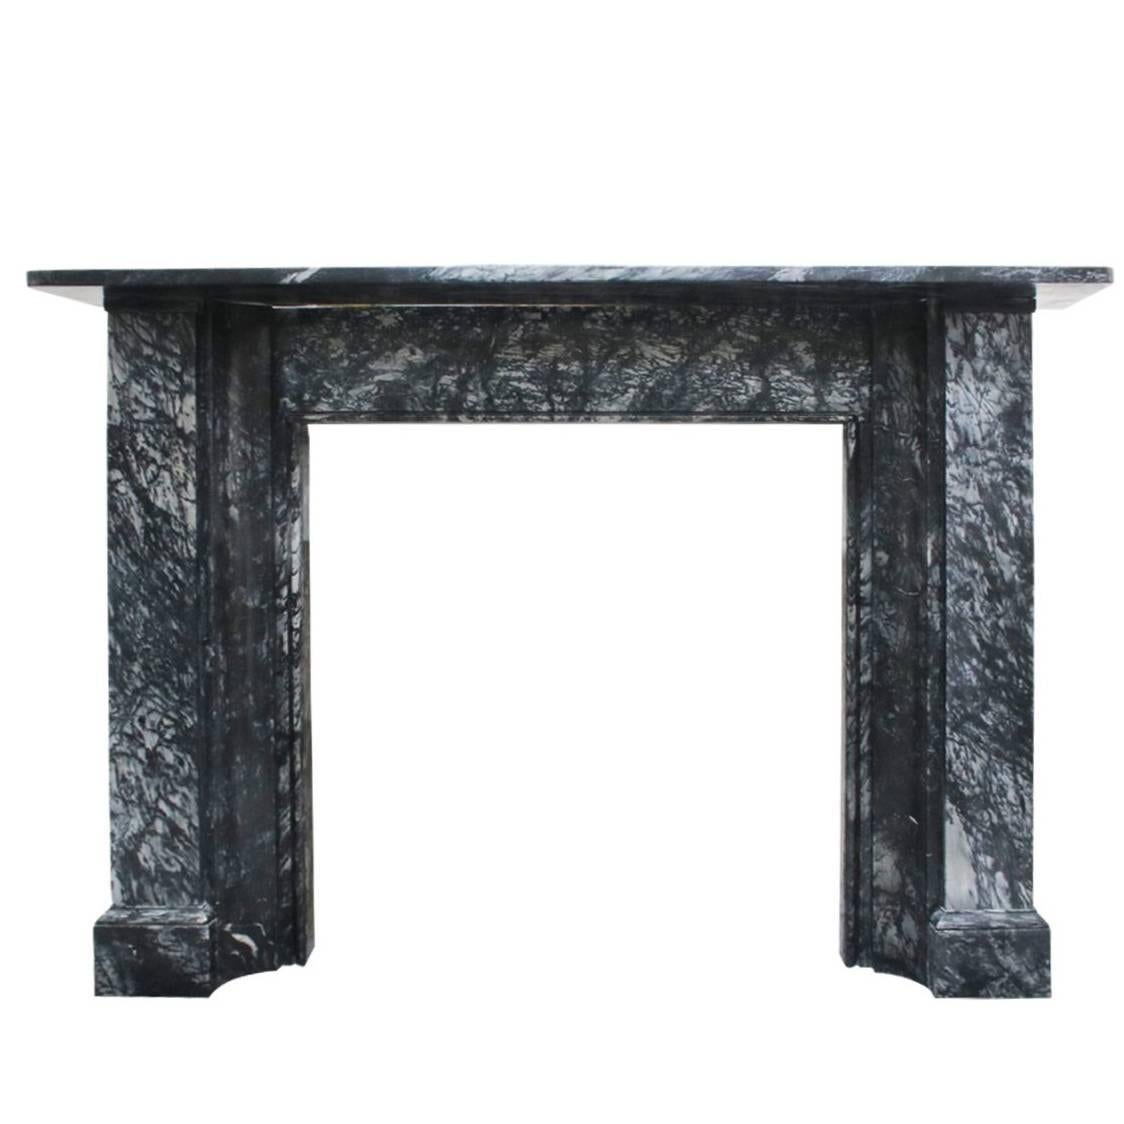 Large Mid-19th Century Grey Marble Fireplace Surround